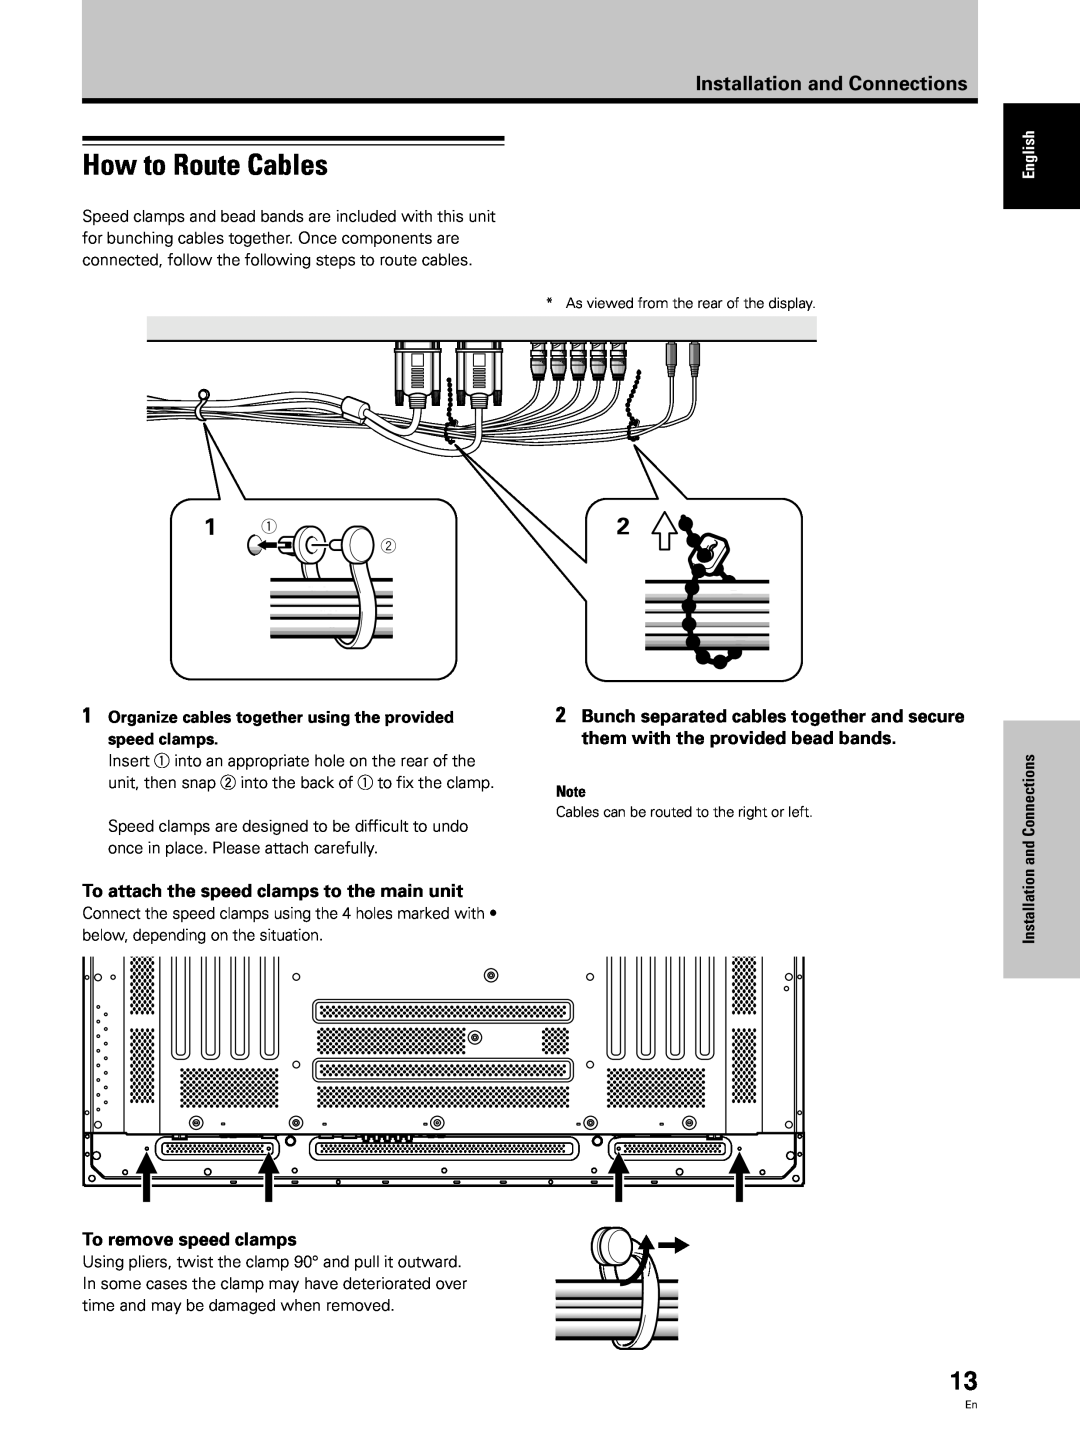 Hitachi CMP5000WXJ How to Route Cables, Installation and Connections, To attach the speed clamps to the main unit 